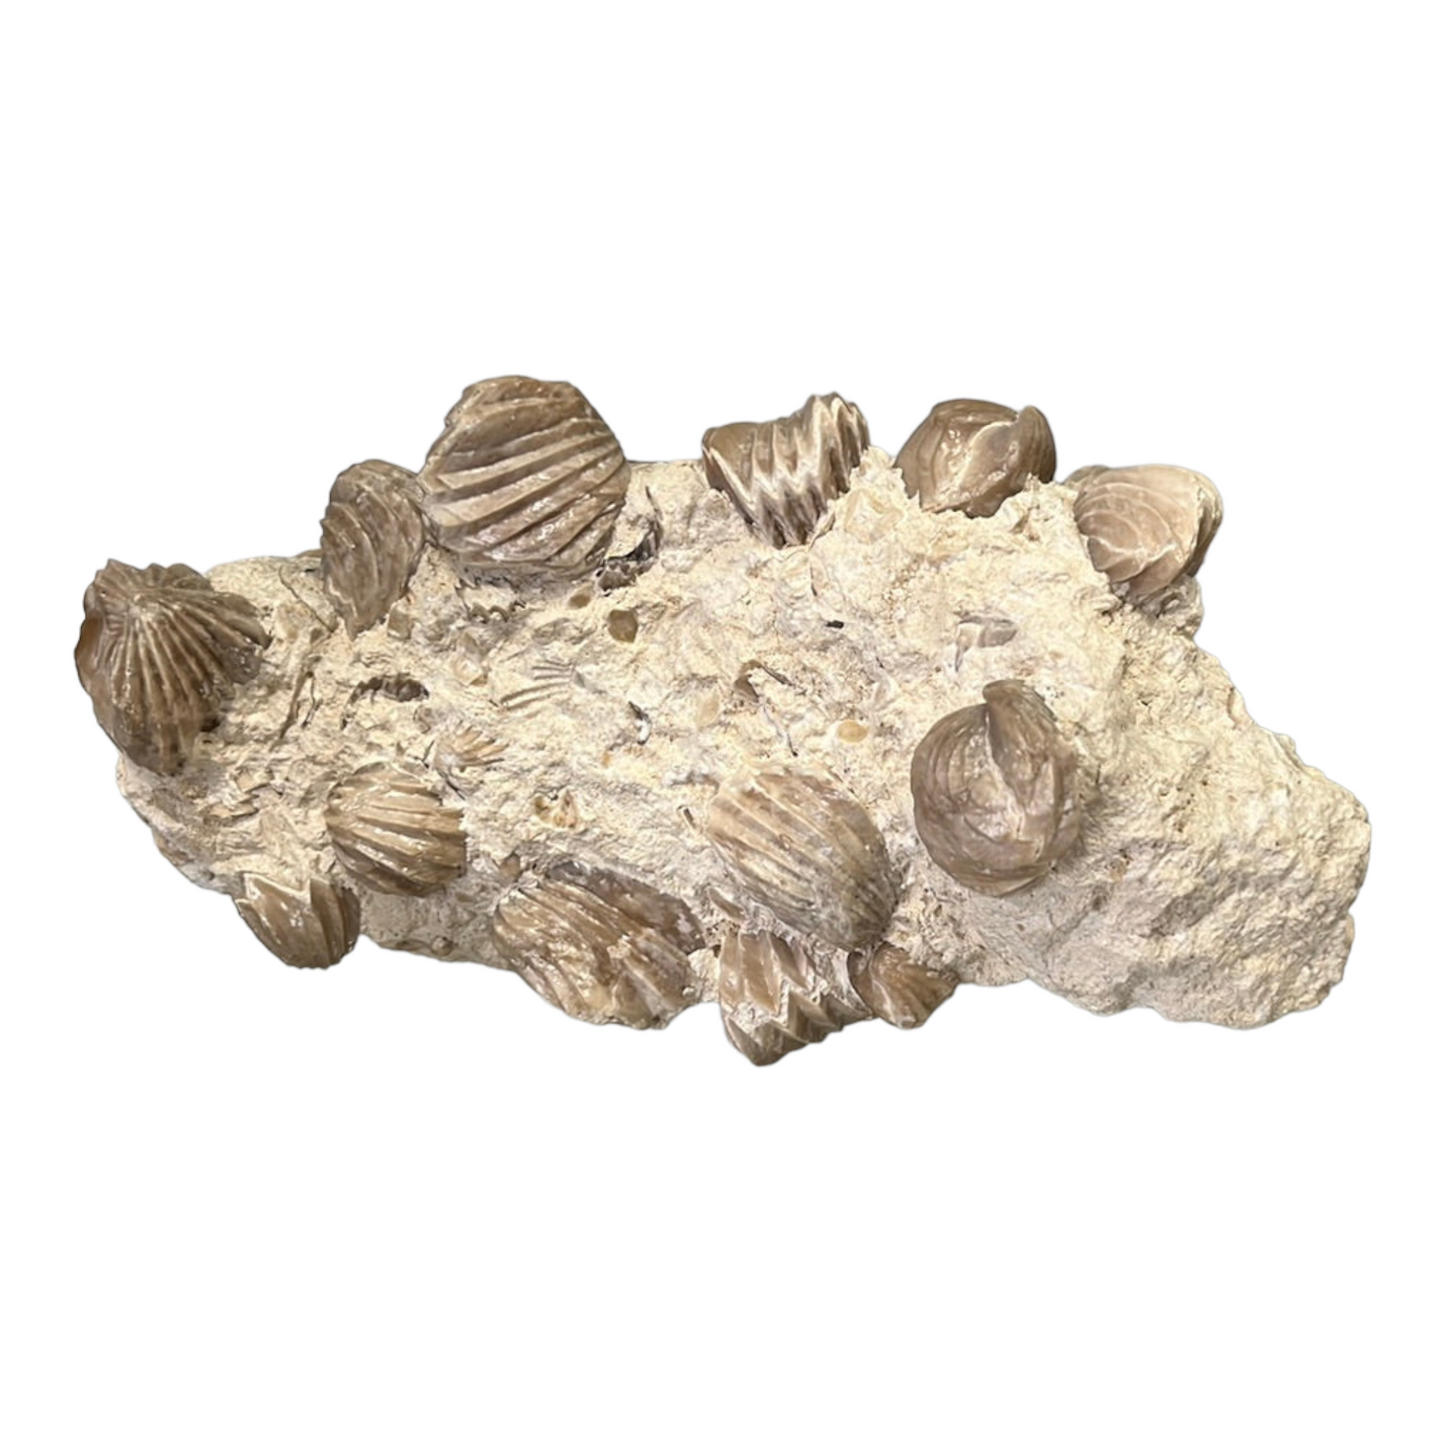 Rhynchonelles fossile France DR84